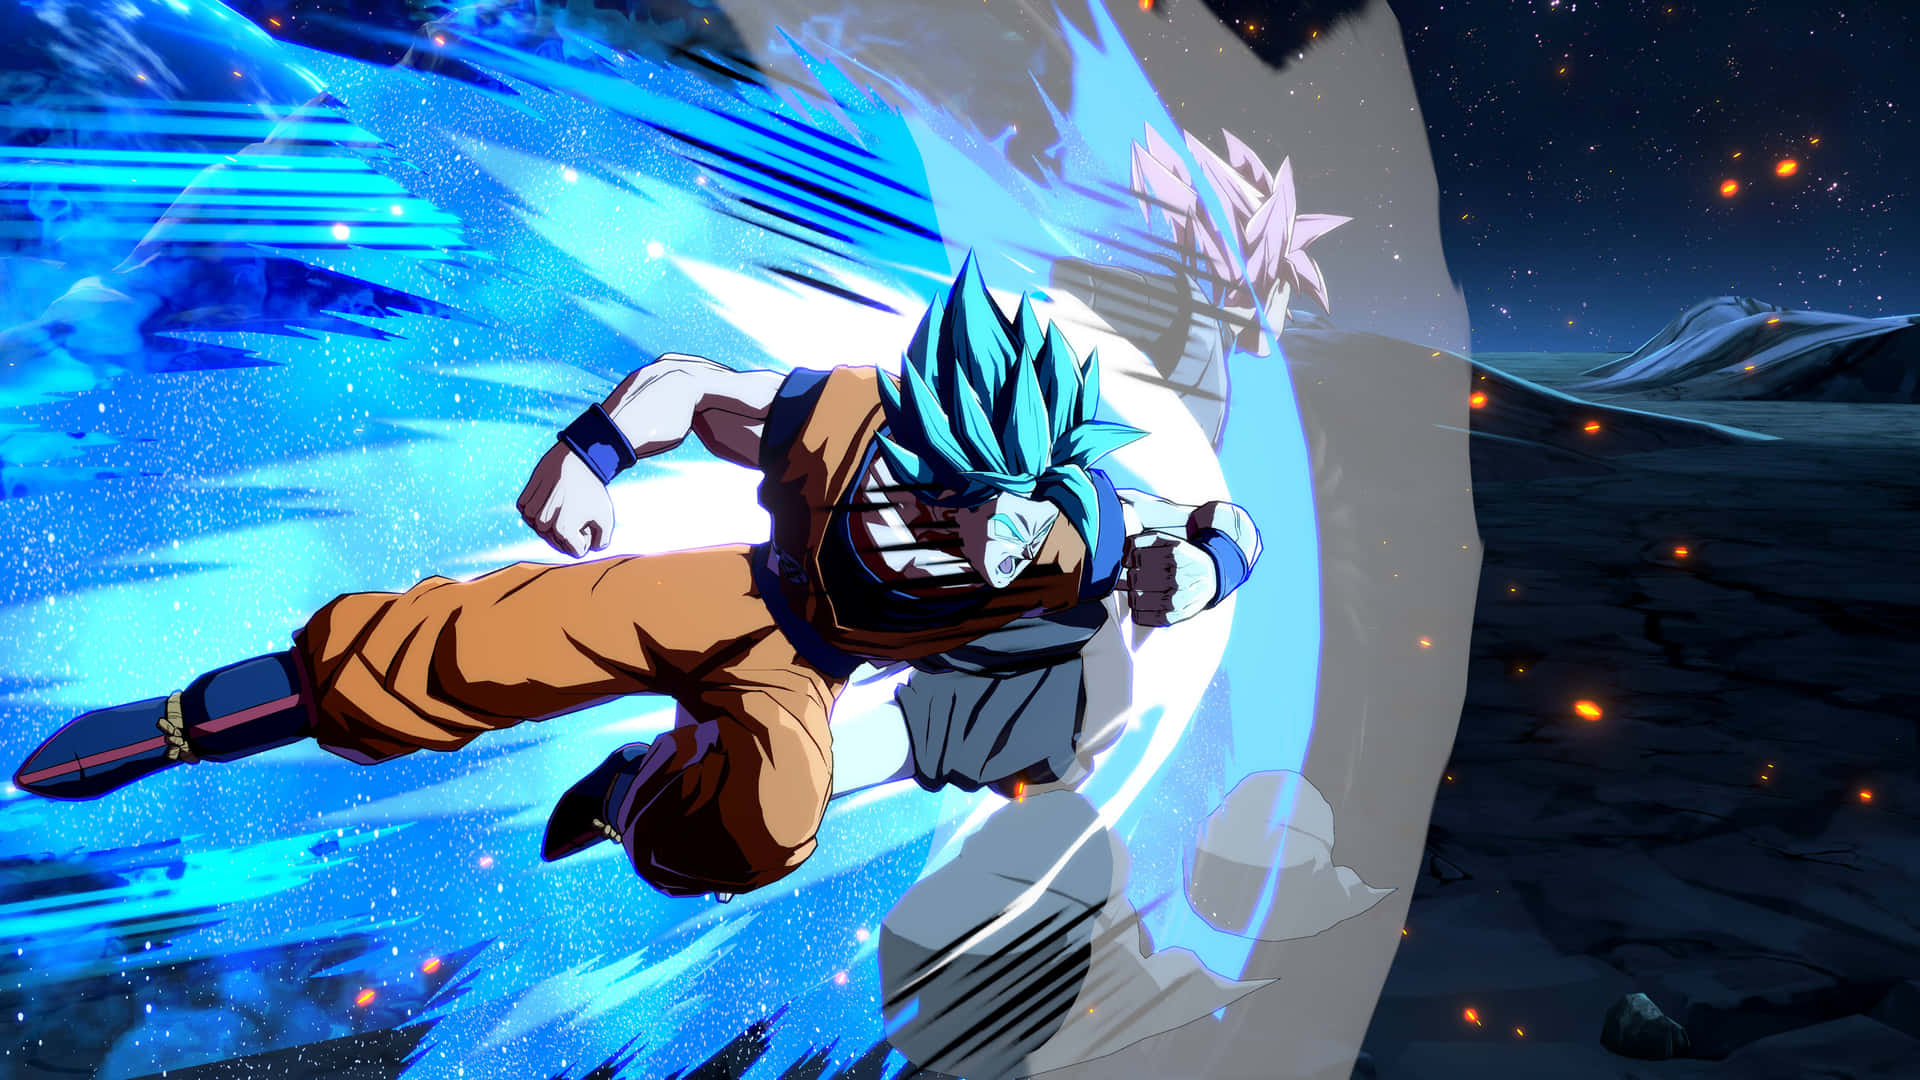 Experience the most intense fighting game action in Dragon Ball Fighterz Wallpaper